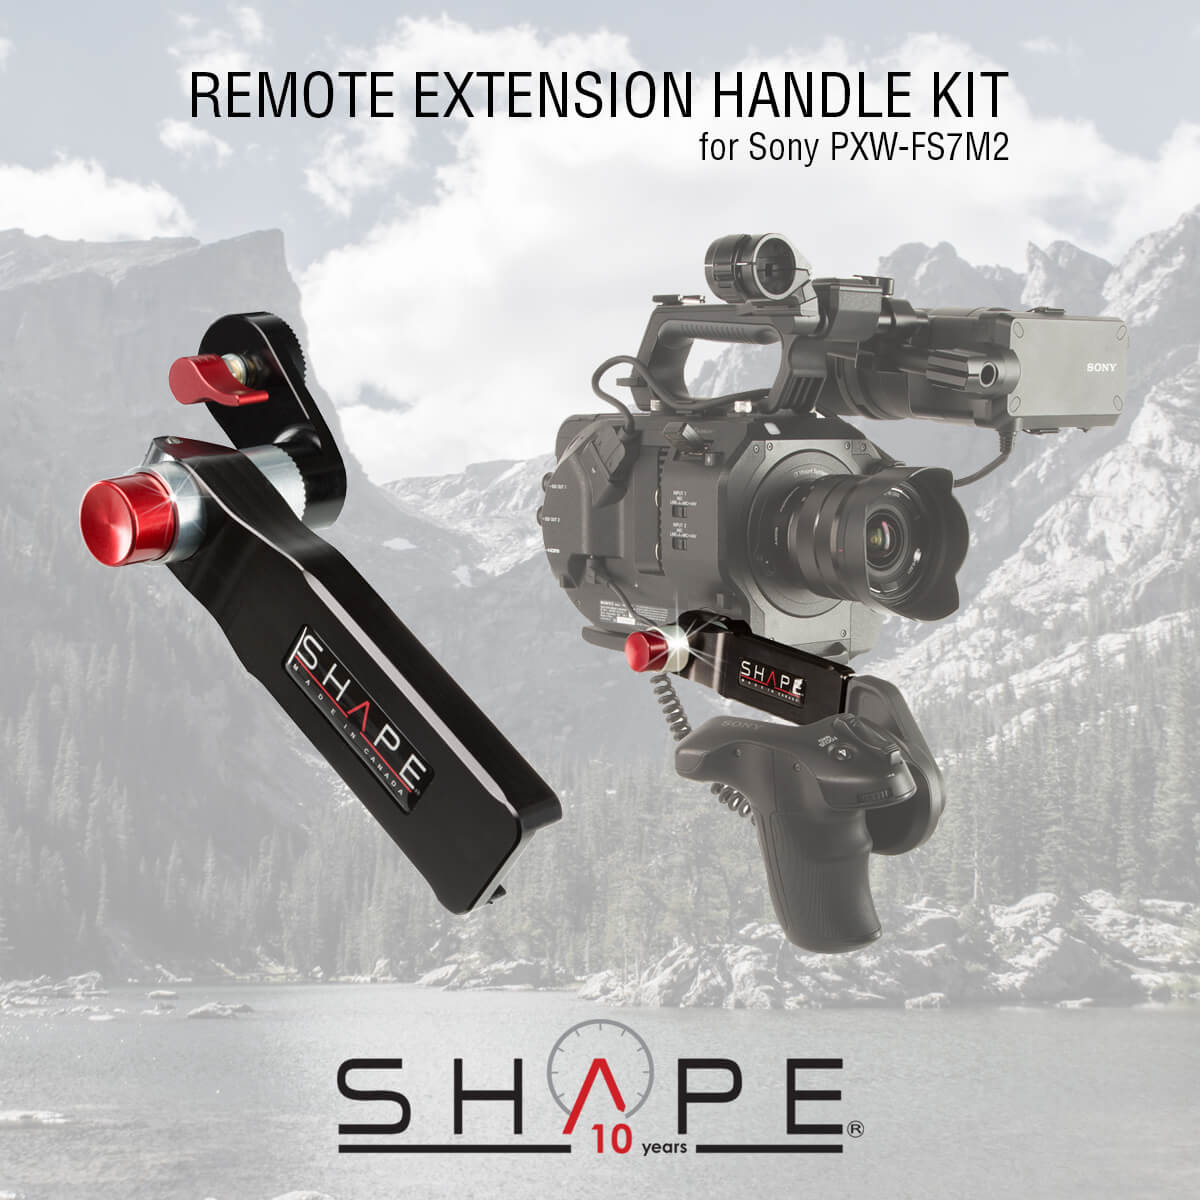 SHAPE Remote Extension handle kit for Sony PXW-FS7M2